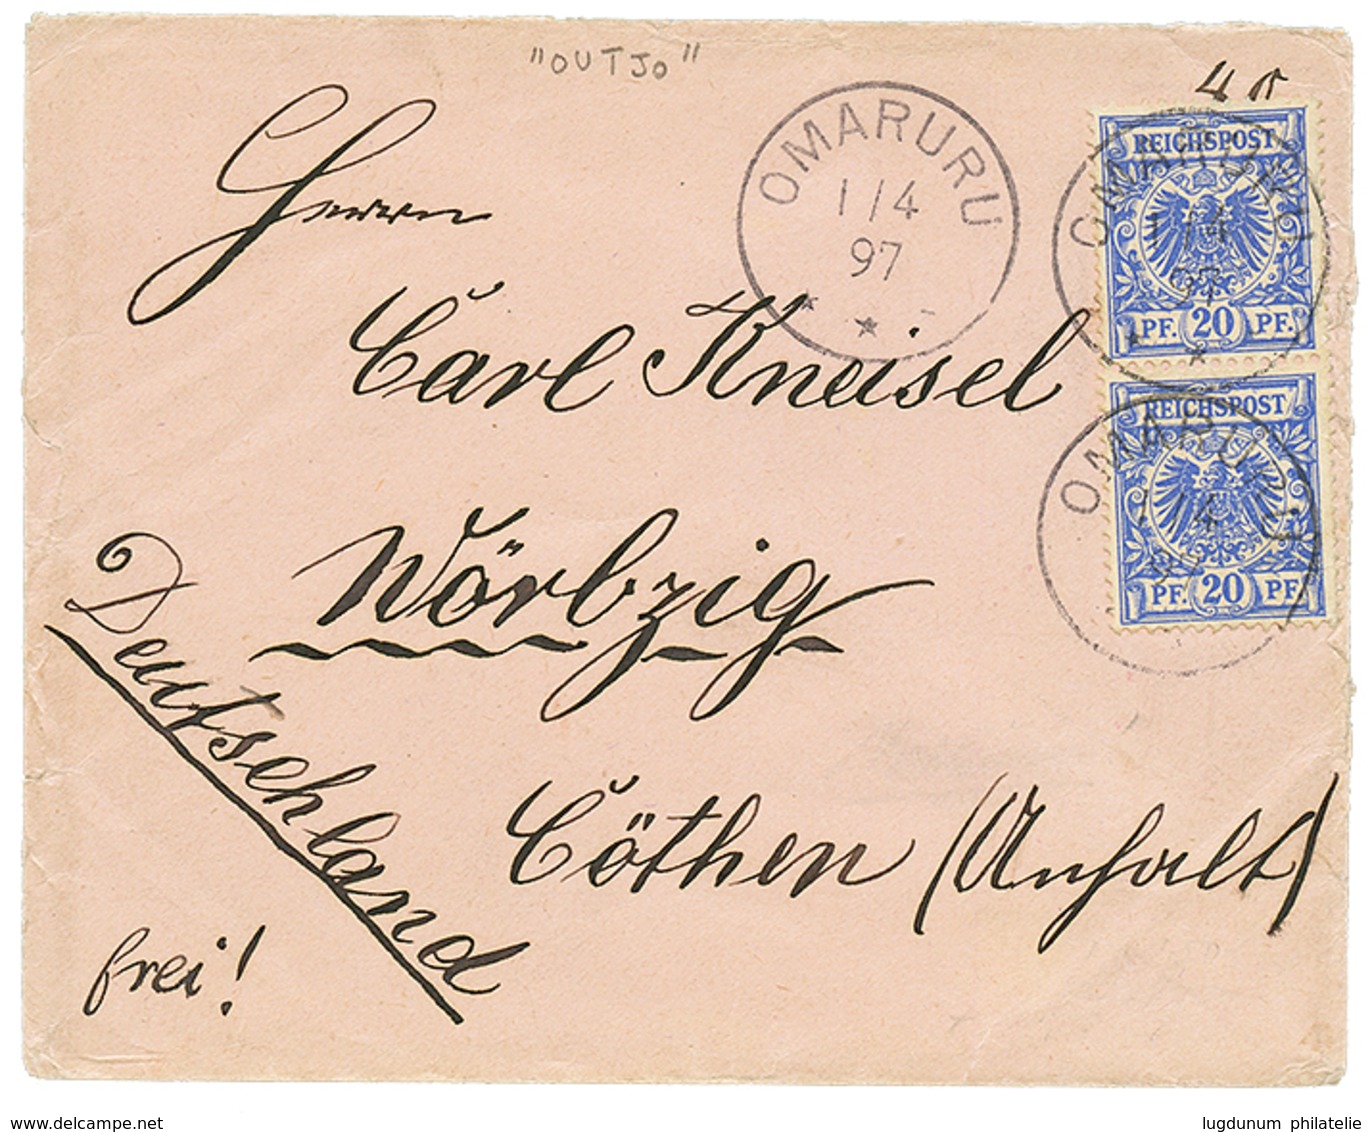 1076 "OUTJO Precursor" : 1897 VORLAUFER 20pf(x2) Canc. OMARURU On Envelope From OUTJO To GERMANY. The Post Office Of OUT - German South West Africa